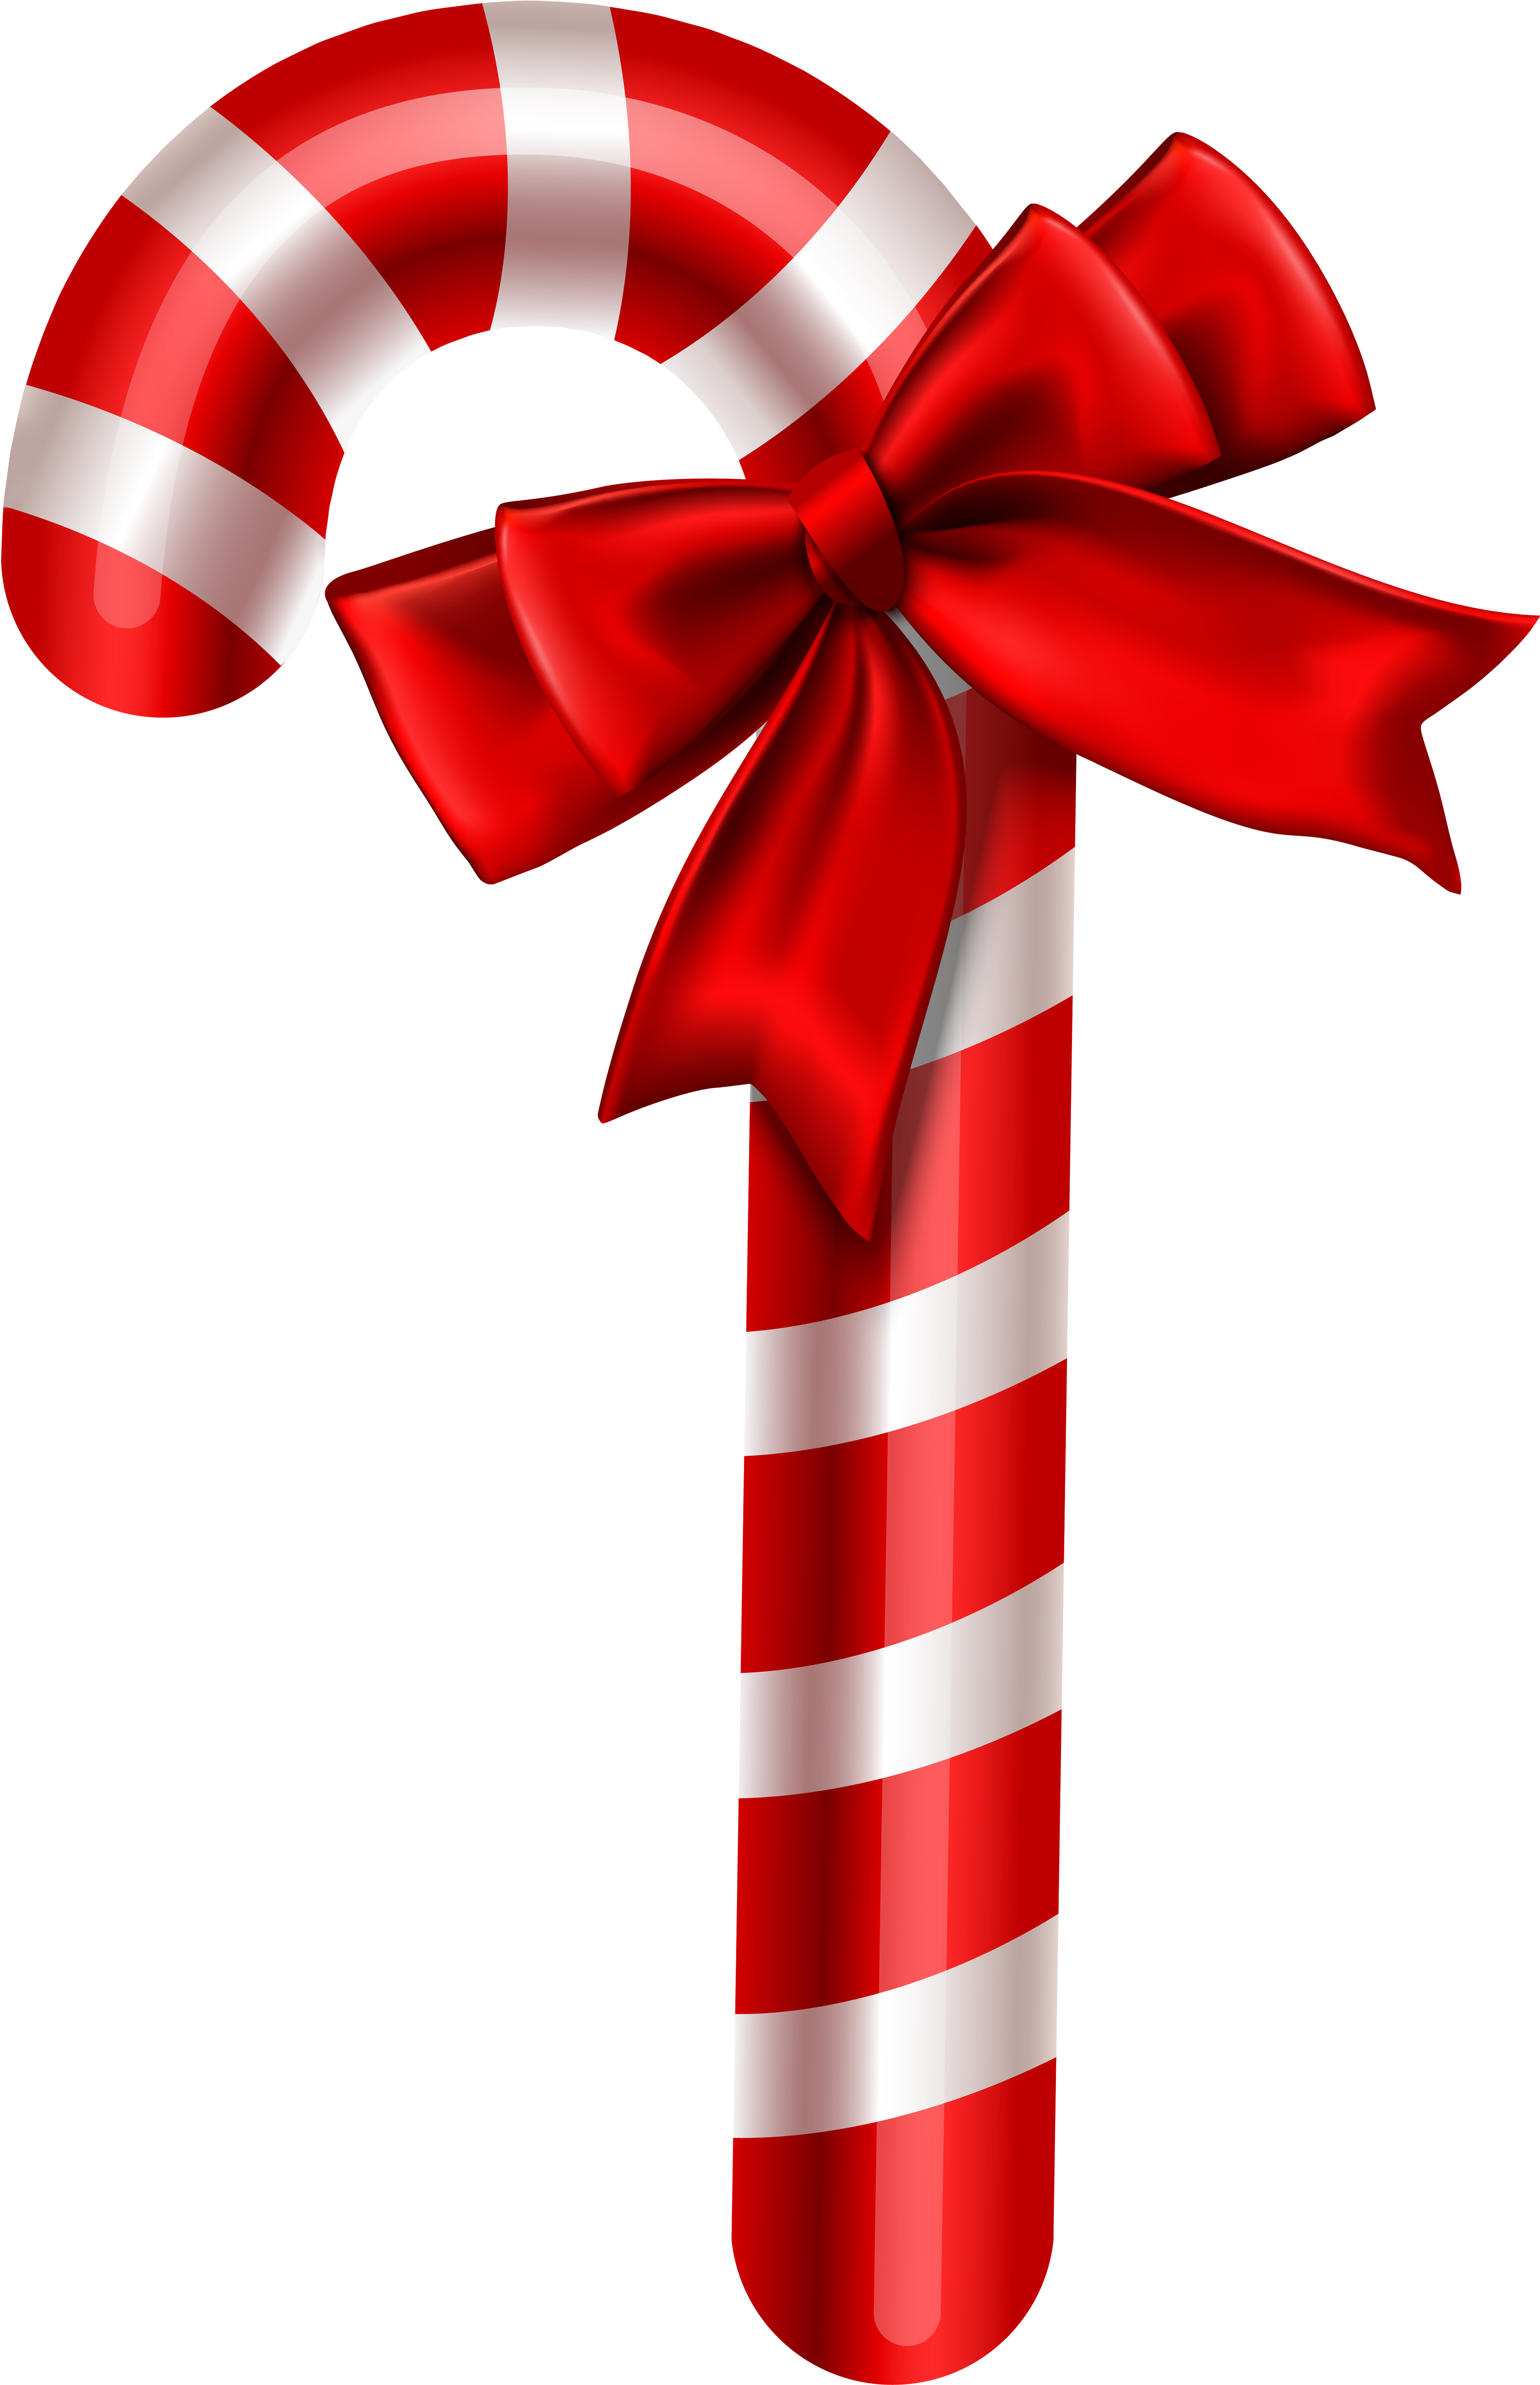 Christmas Candy PNG Image PurePNG Free transparent CC0 PNG Image